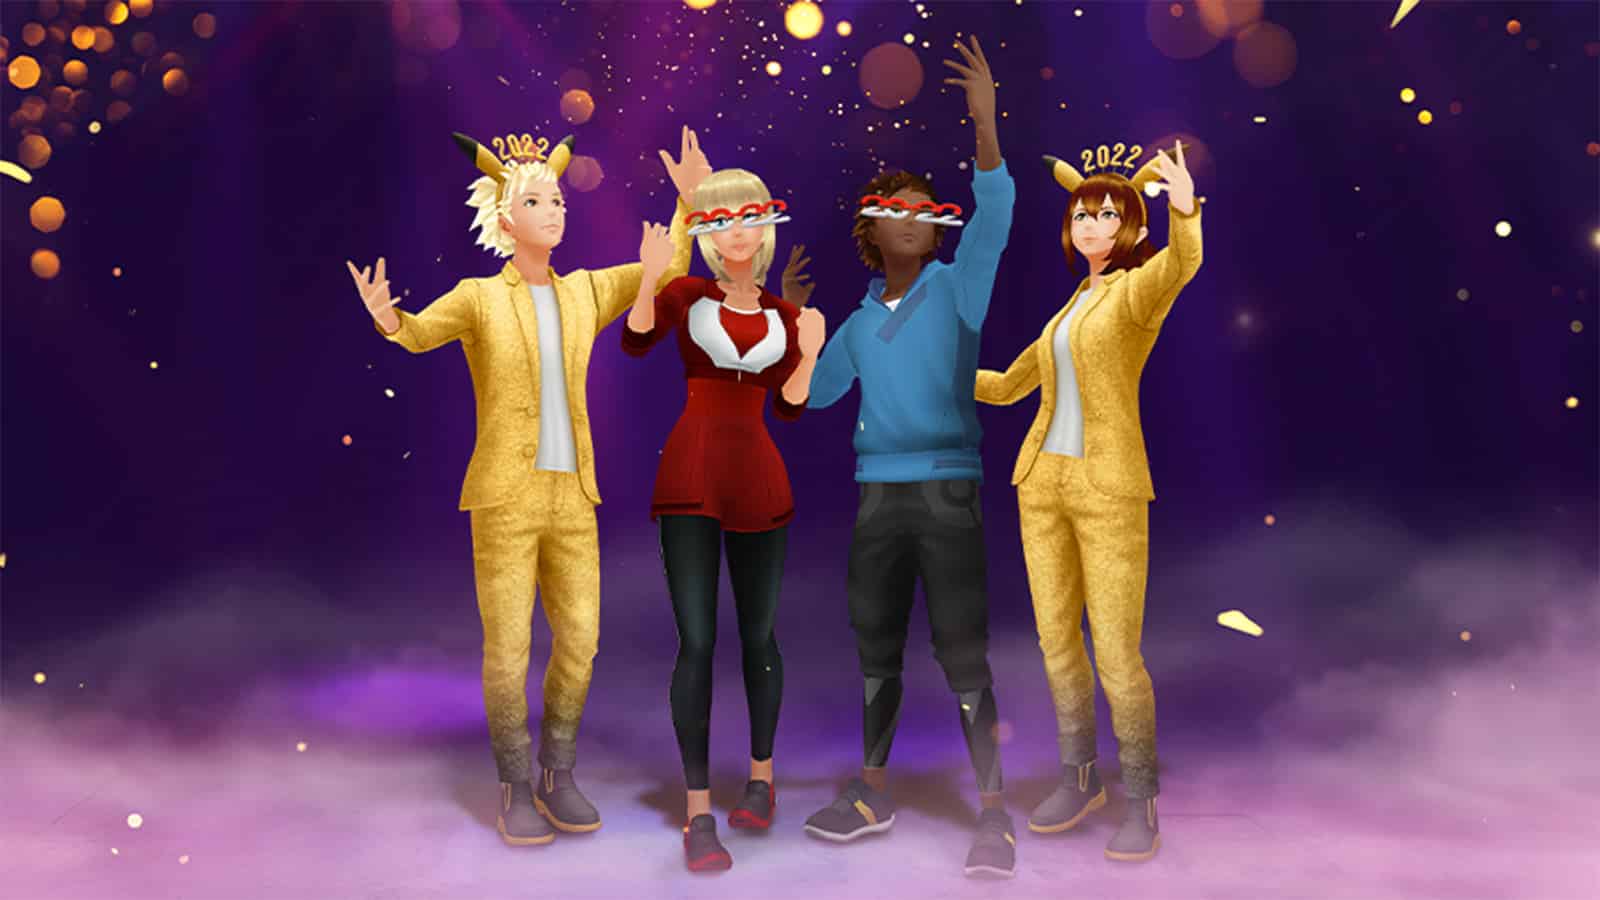 Trainers celebrating the New Years 2022 event with fireworks in Pokemon Go